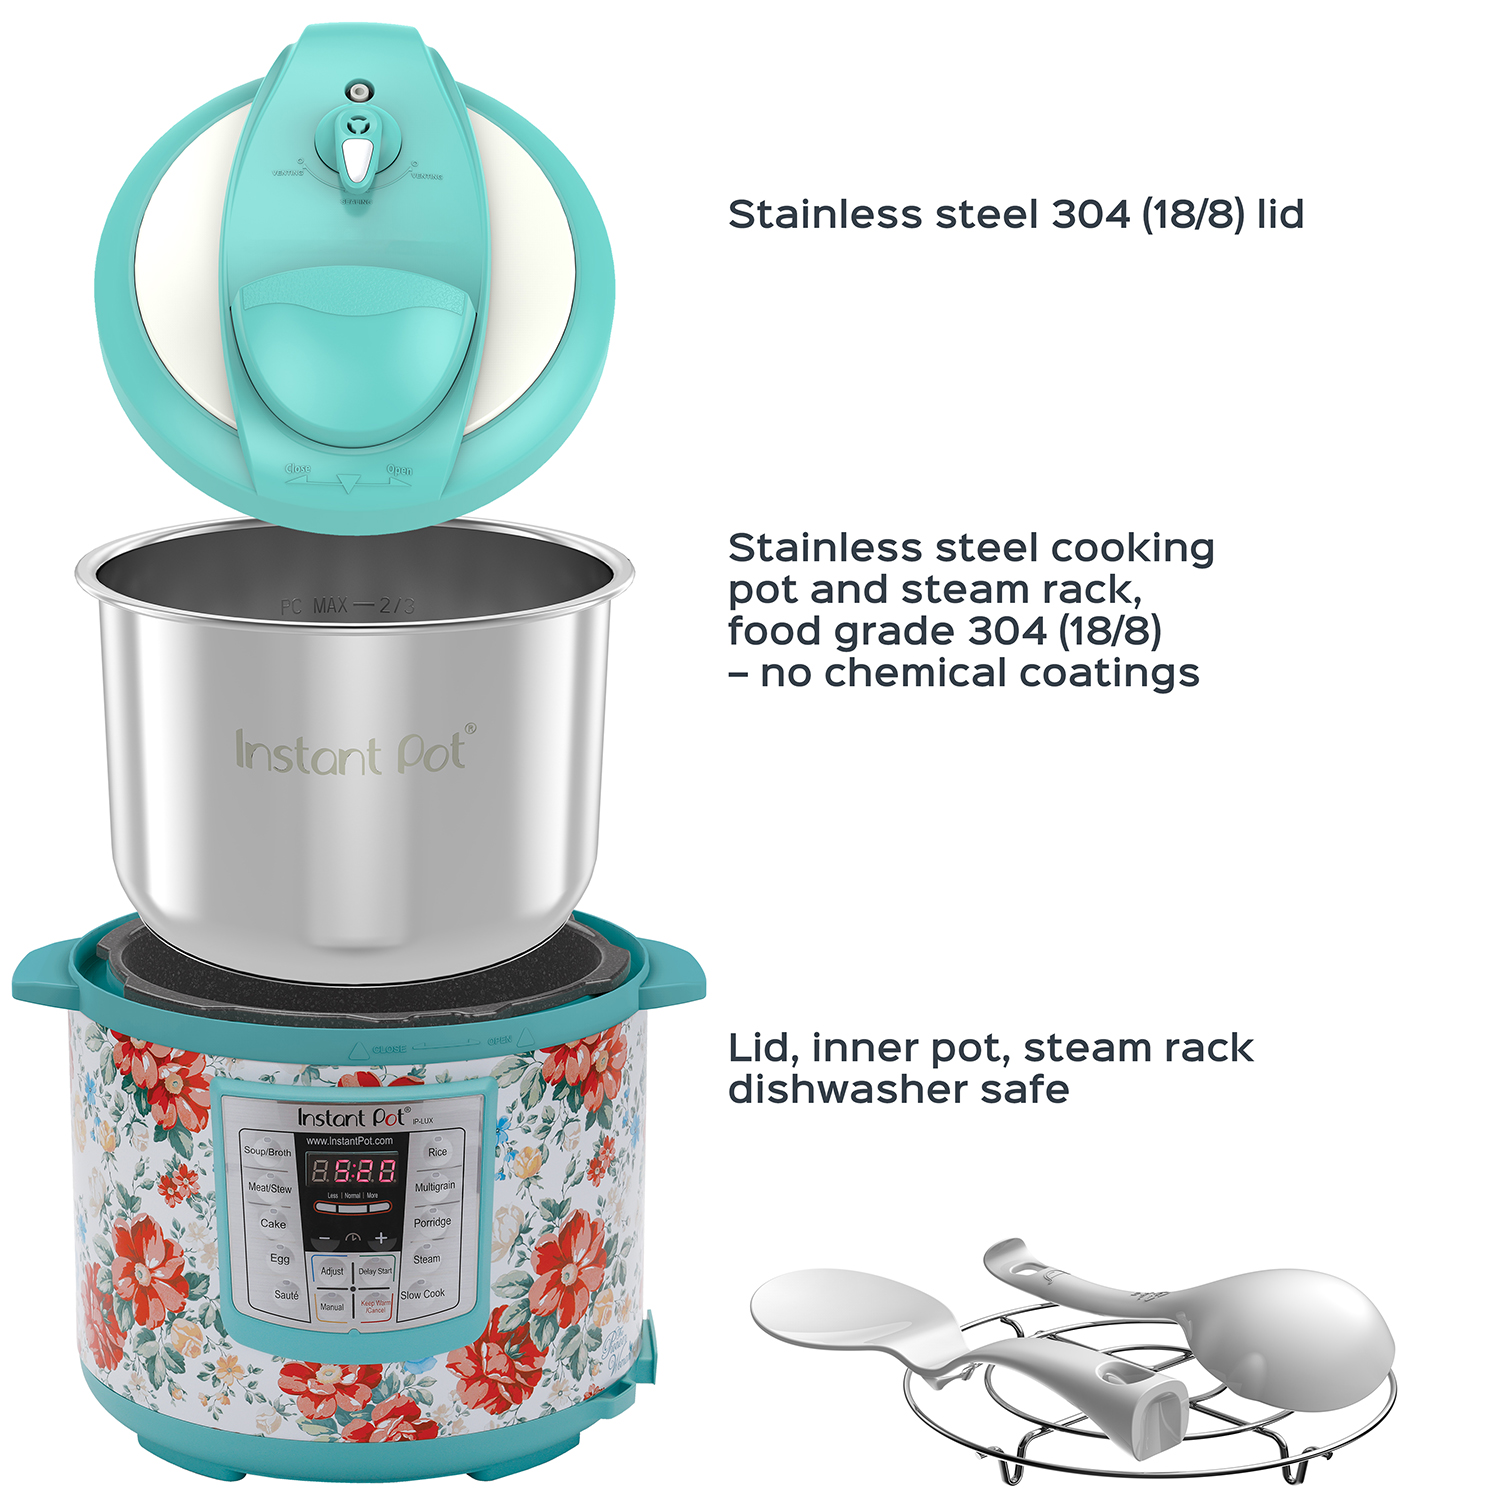 The Pioneer Woman Instant Pot LUX60 6 Qt Vintage Floral 6-in-1 Multi-Use Programmable Pressure Cooker, Slow Cooker, Rice Cooker, Saute, Steamer, and Warmer - image 2 of 12